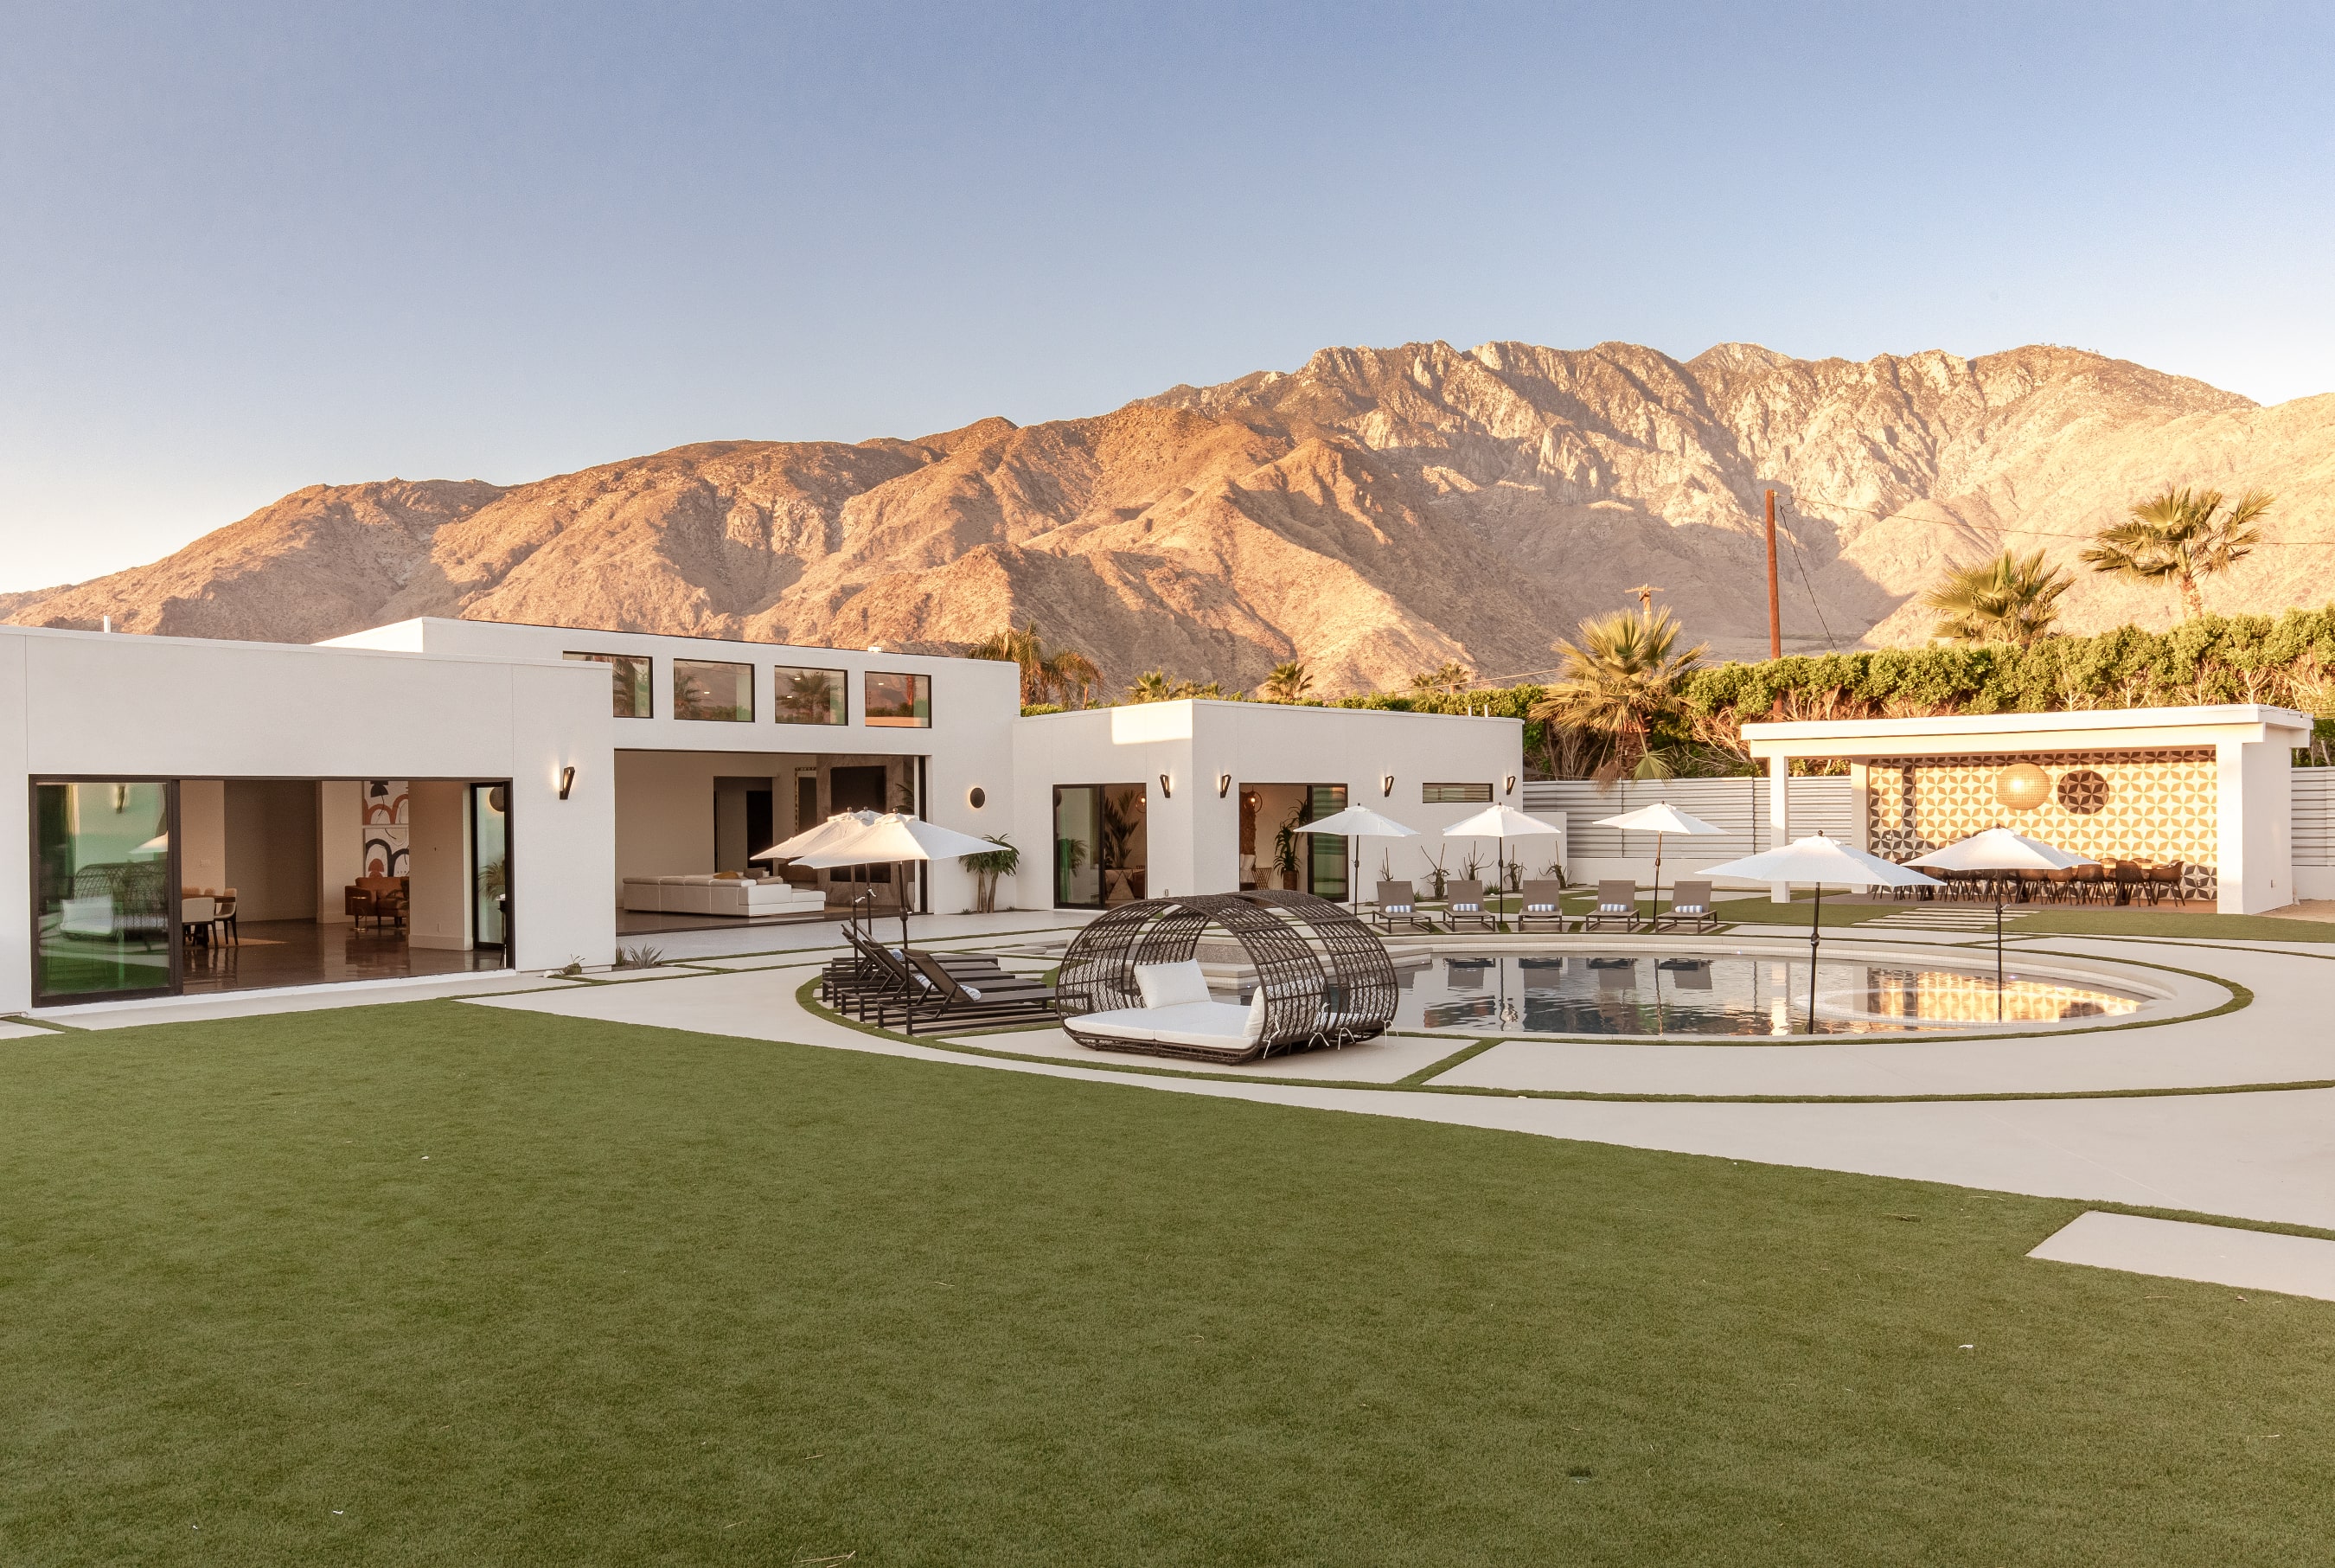 Palm Springs, California – This expansive desert escape is located only a couple hours by car from Los Angeles. The stunning outdoor space includes a private pool and sunset-viewing pavilion.